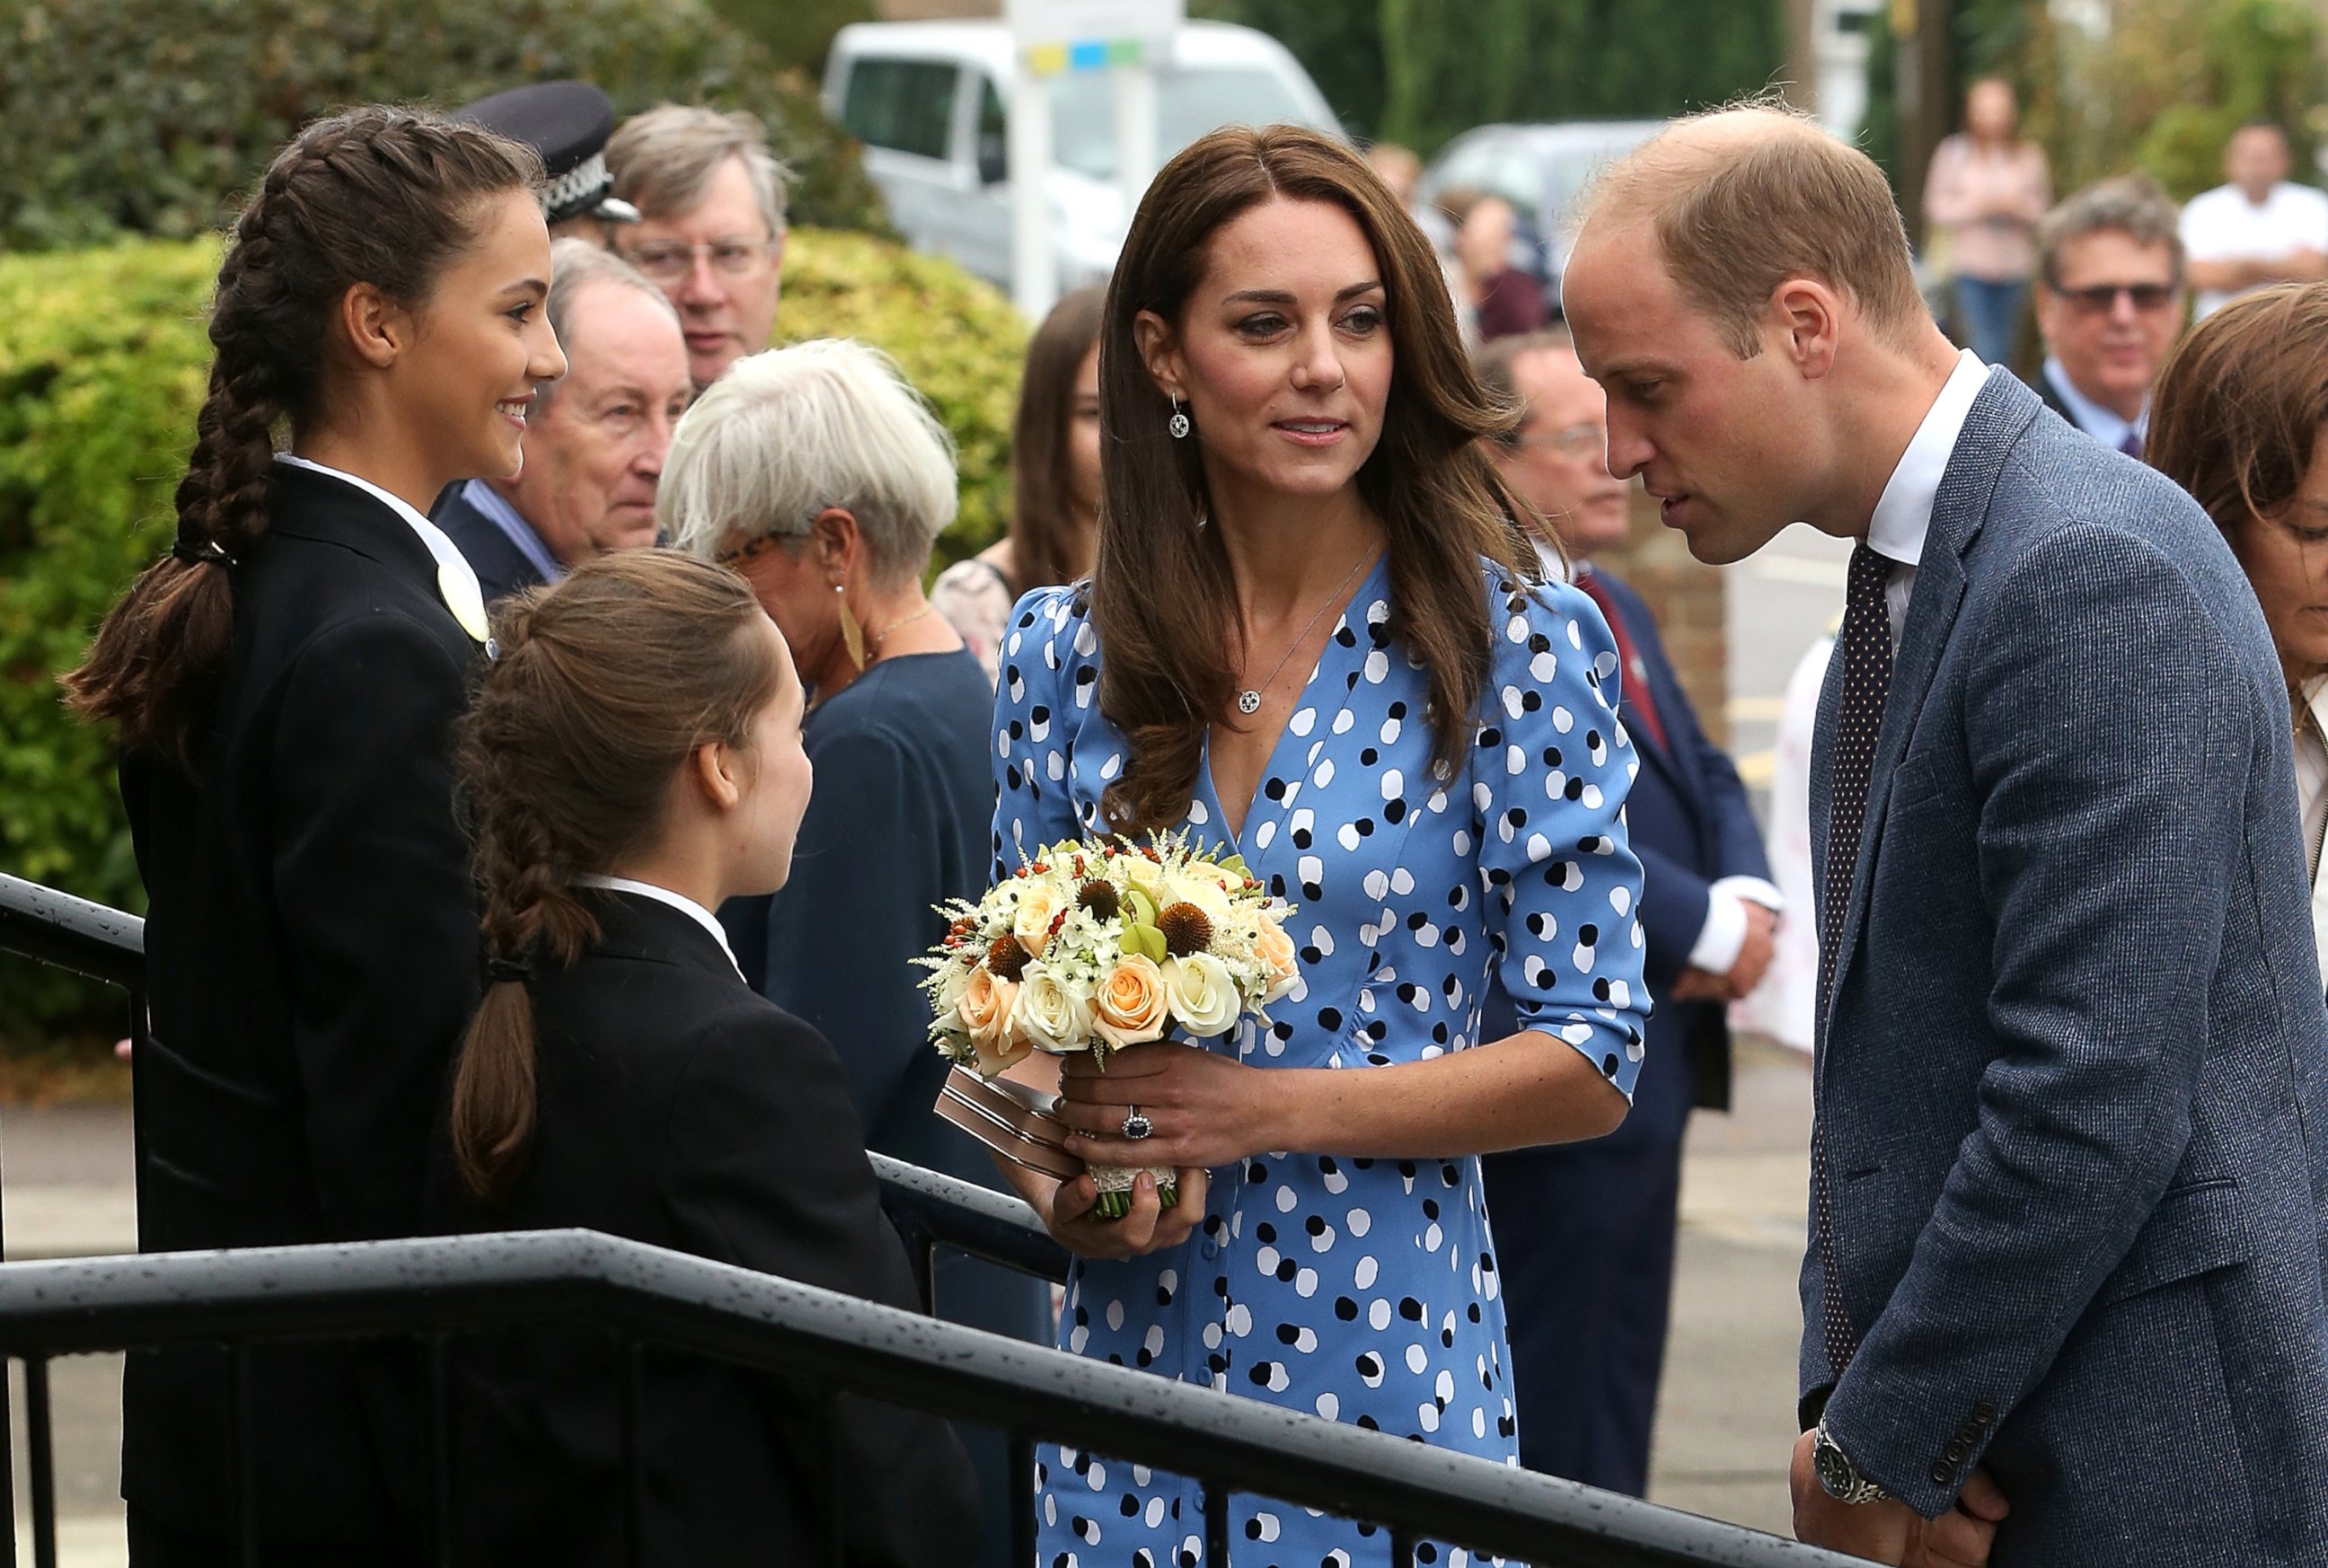 PHOTO: Catherine, Duchess of Cambridge and Prince William, Duke of Cambridge arrive at Stewards Academy, Sept. 16, 2016 in Harlow, England.